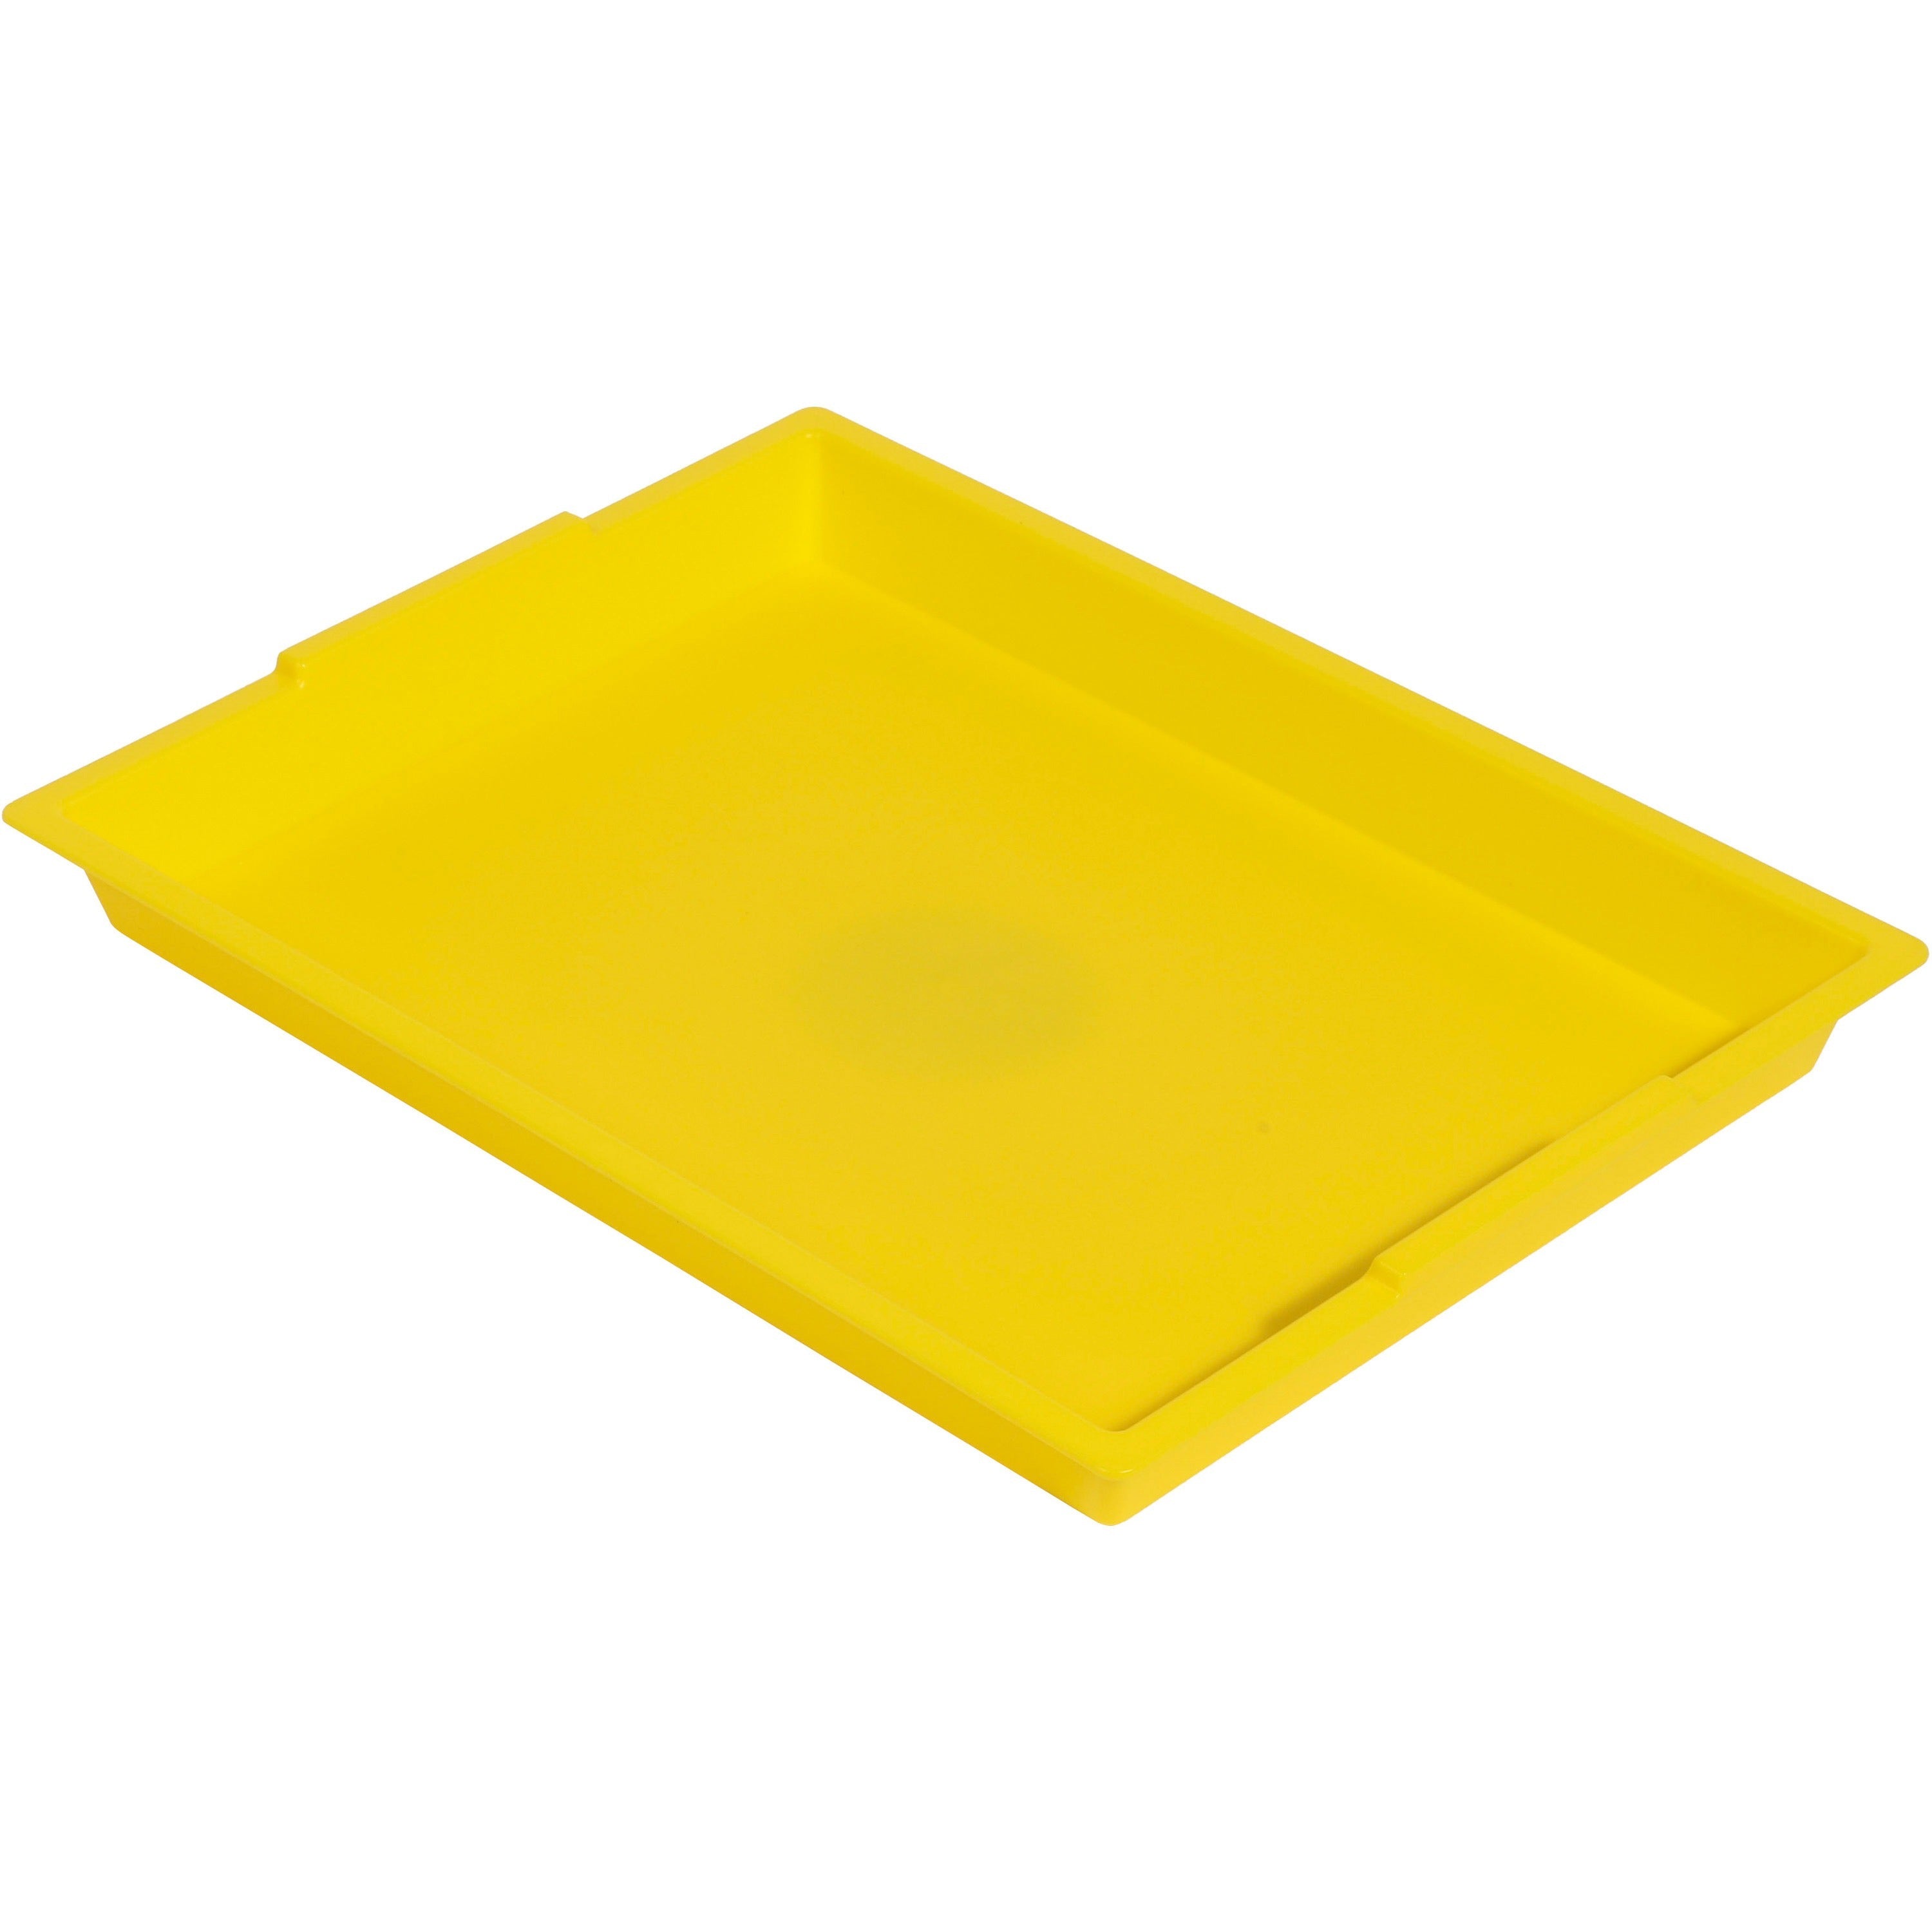 deflecto-antimicrobial-finger-paint-tray-painting-183height-x-1604width-x-1207depth-yellow-polypropylene-plastic_def39507yel - 1